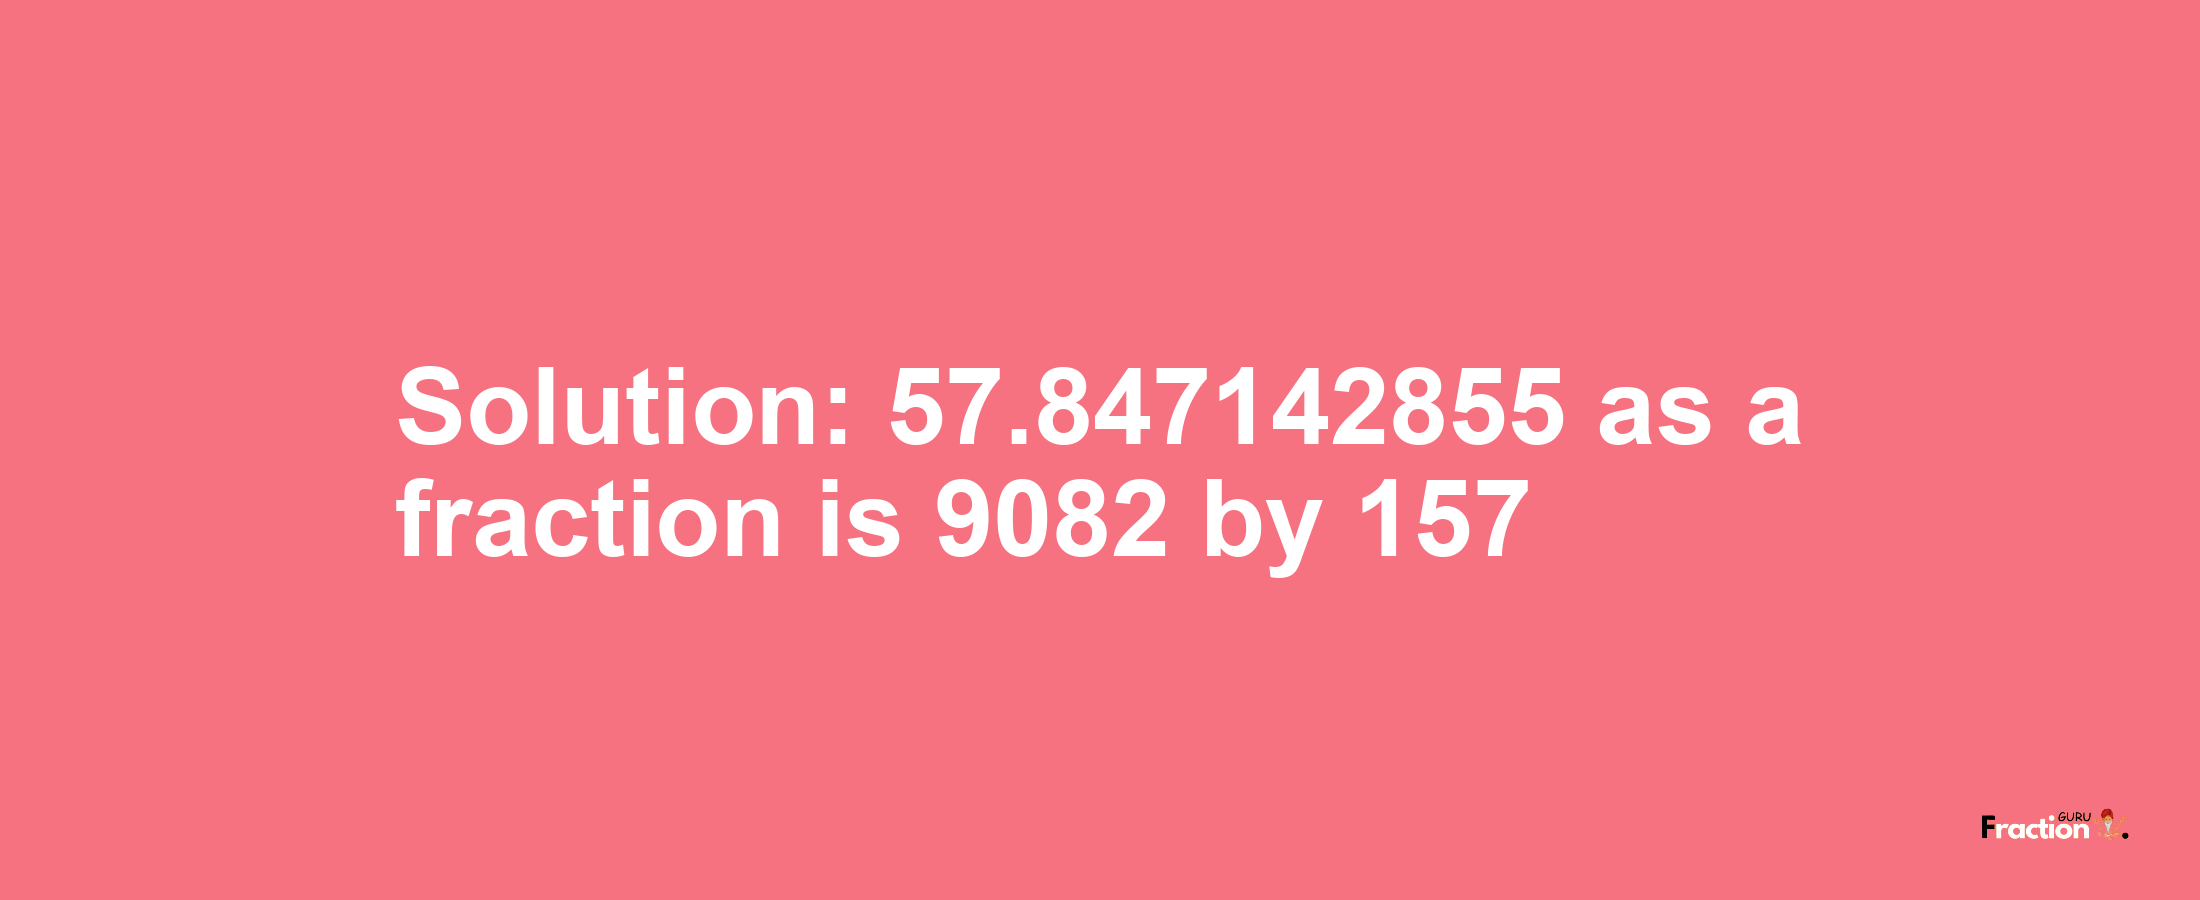 Solution:57.847142855 as a fraction is 9082/157